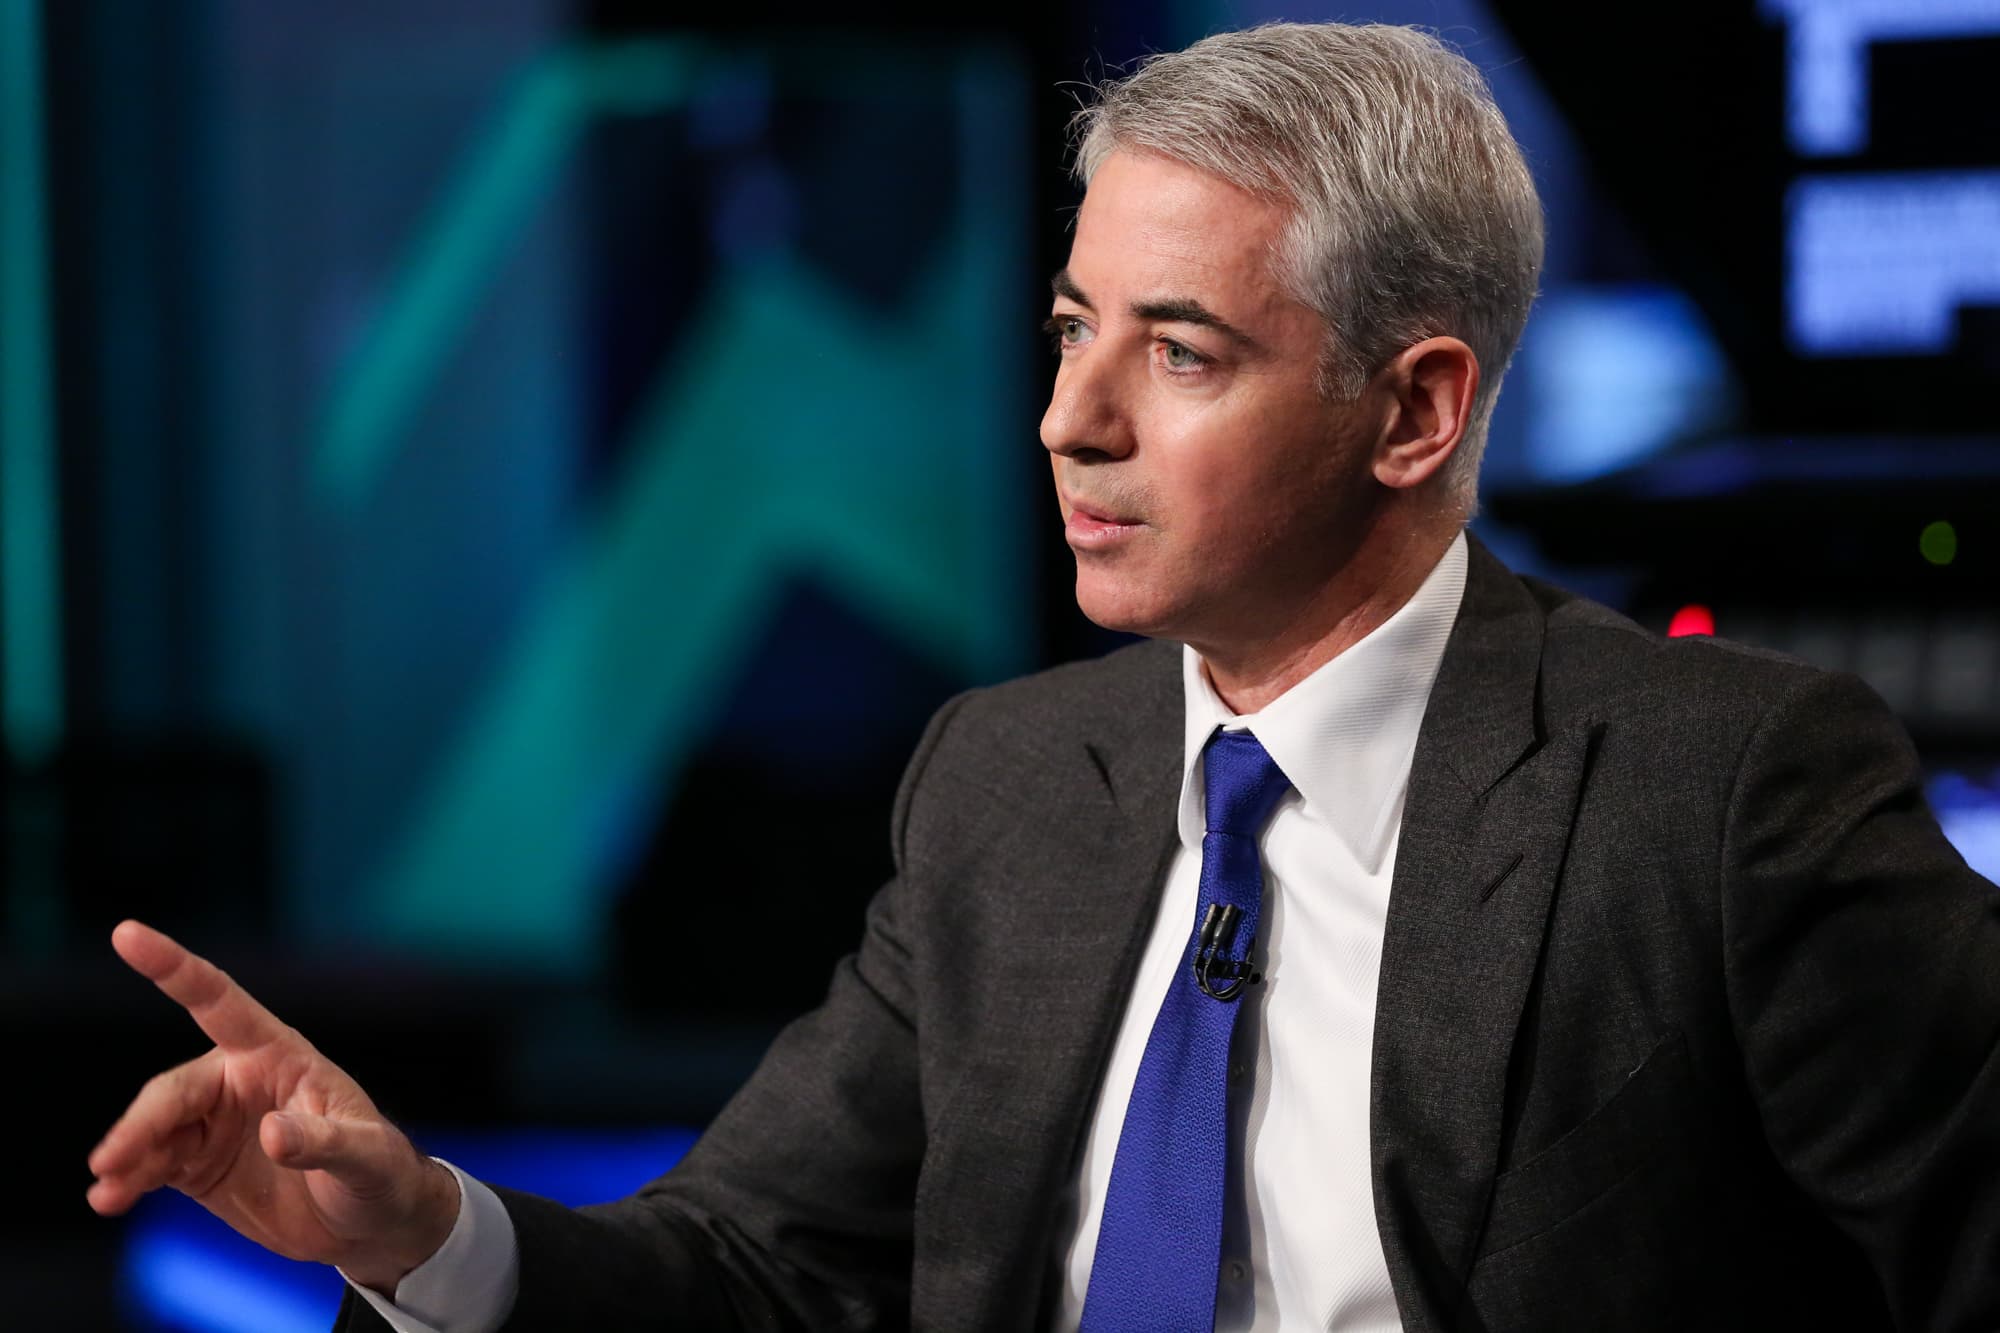 Bill Ackman says the Covid omicron variant could end up being bullish for markets